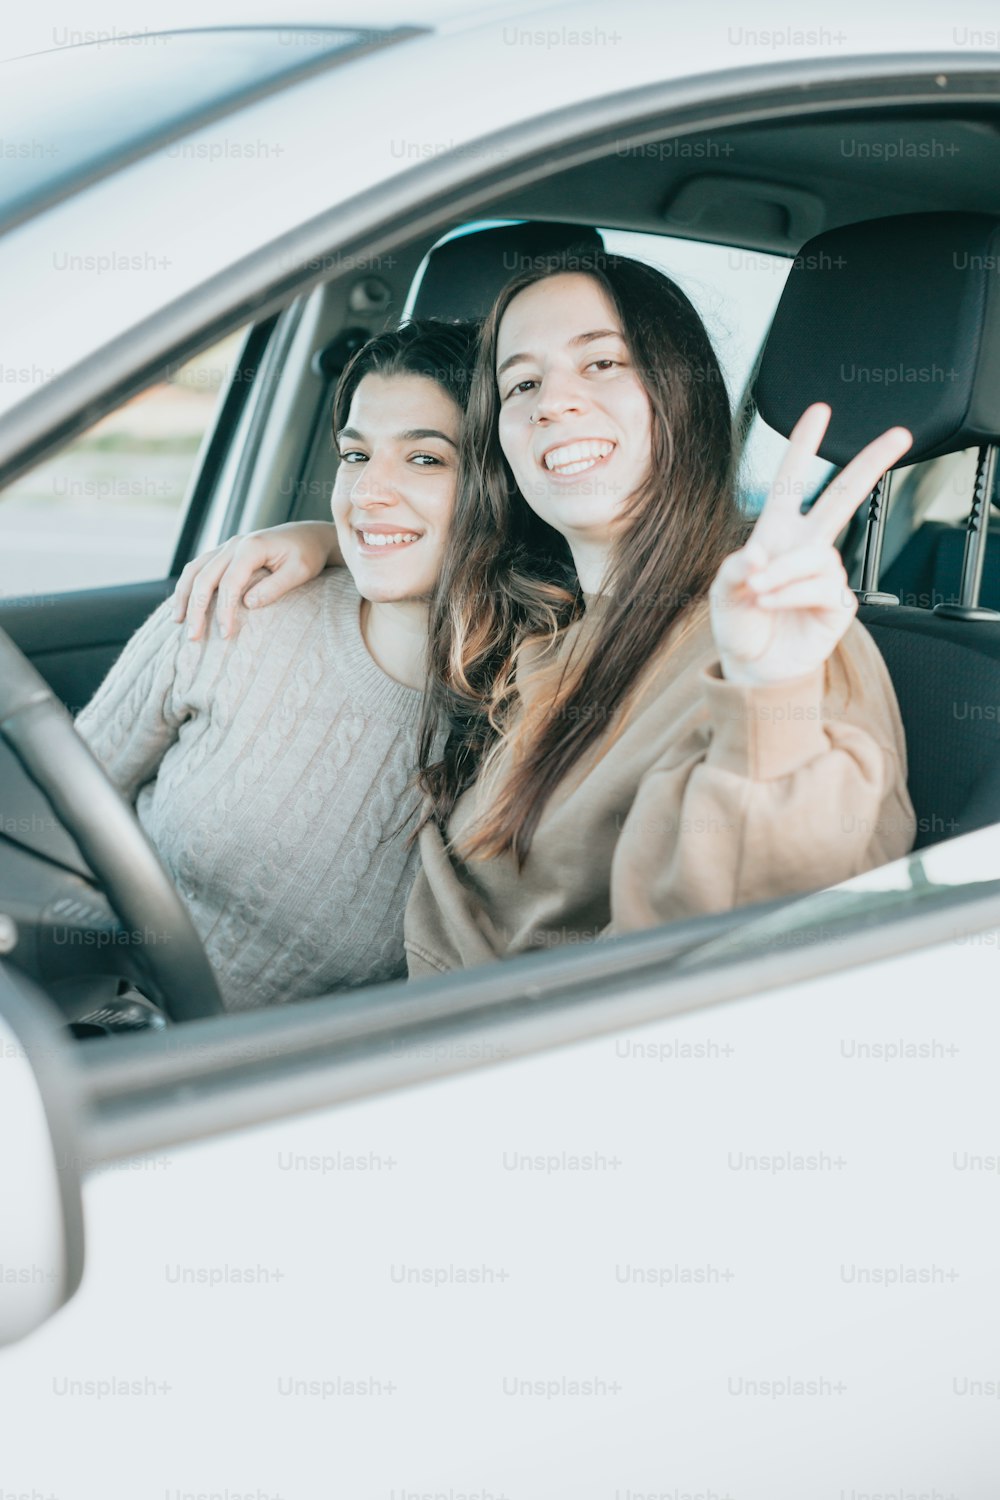 two women sitting in a car giving the peace sign